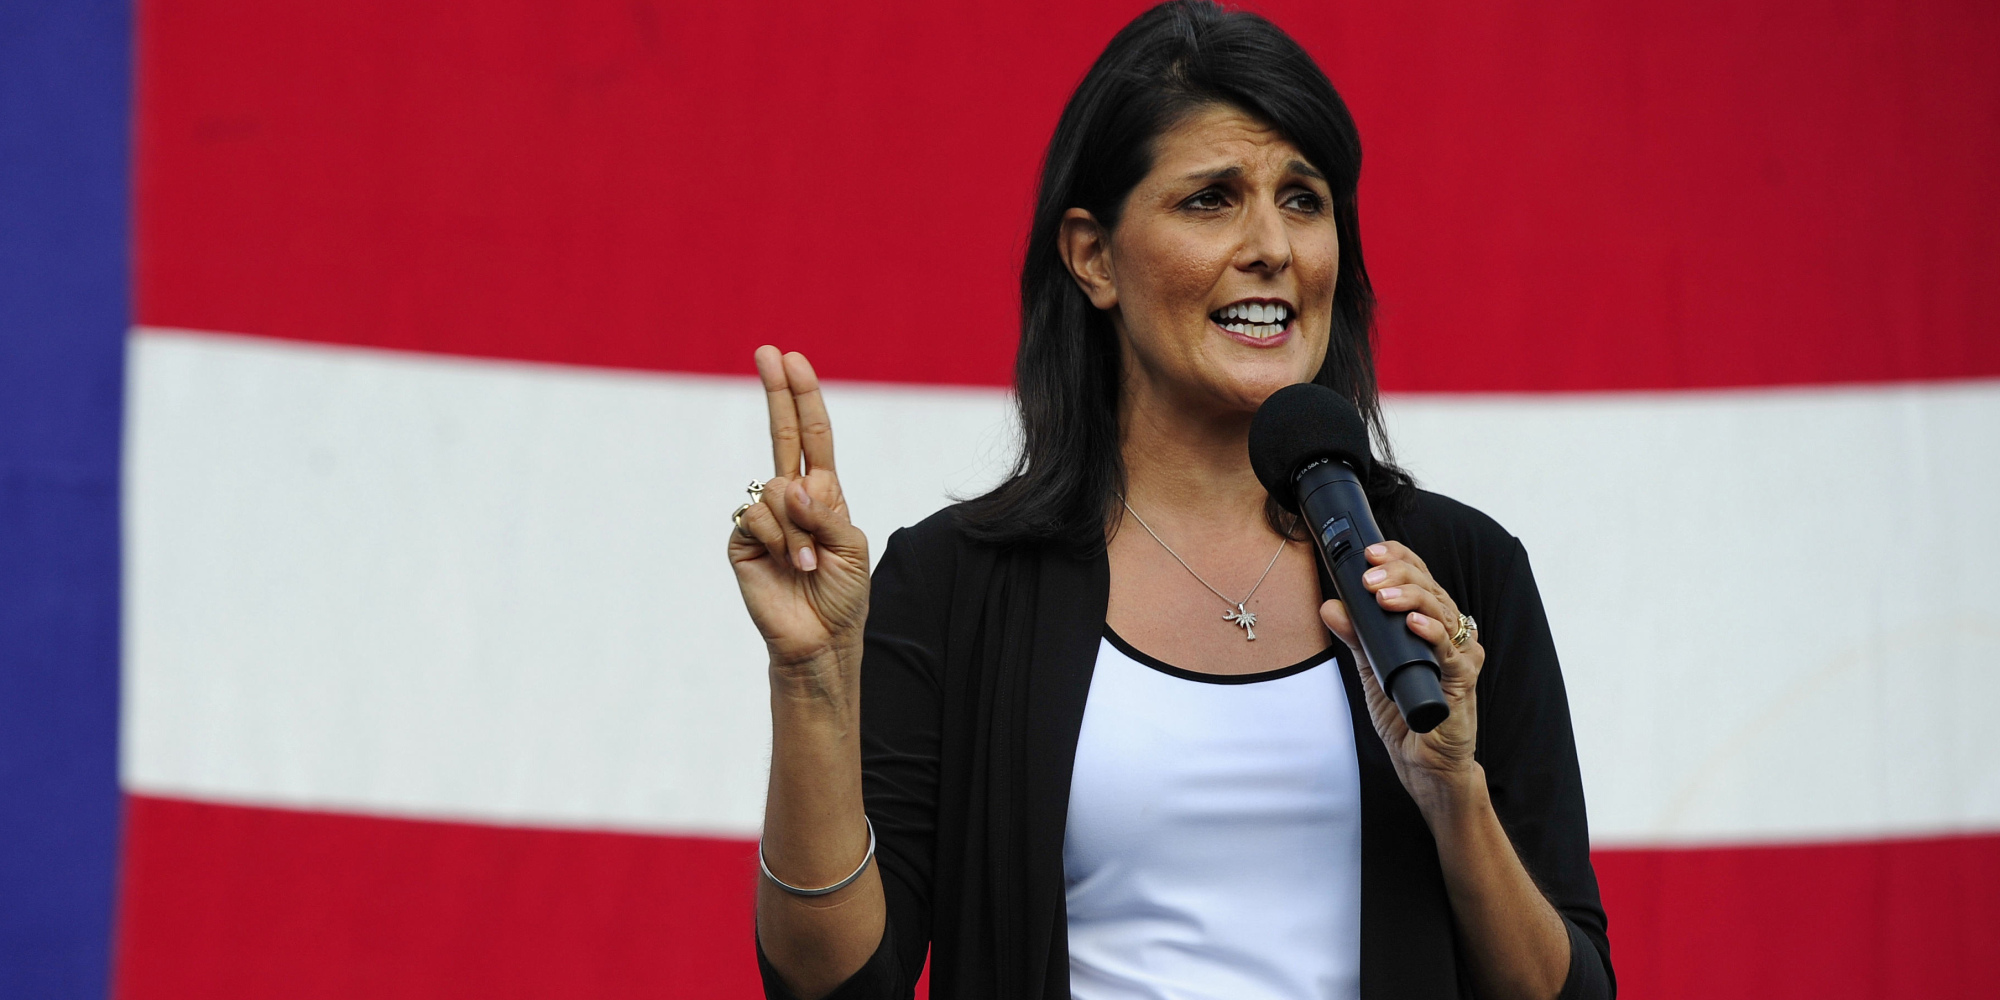 In this Aug. 26, 2013 photo, South Carolina Republican Gov. Nikki Haley announces her candidacy for a second term in Greenville, S.C. 